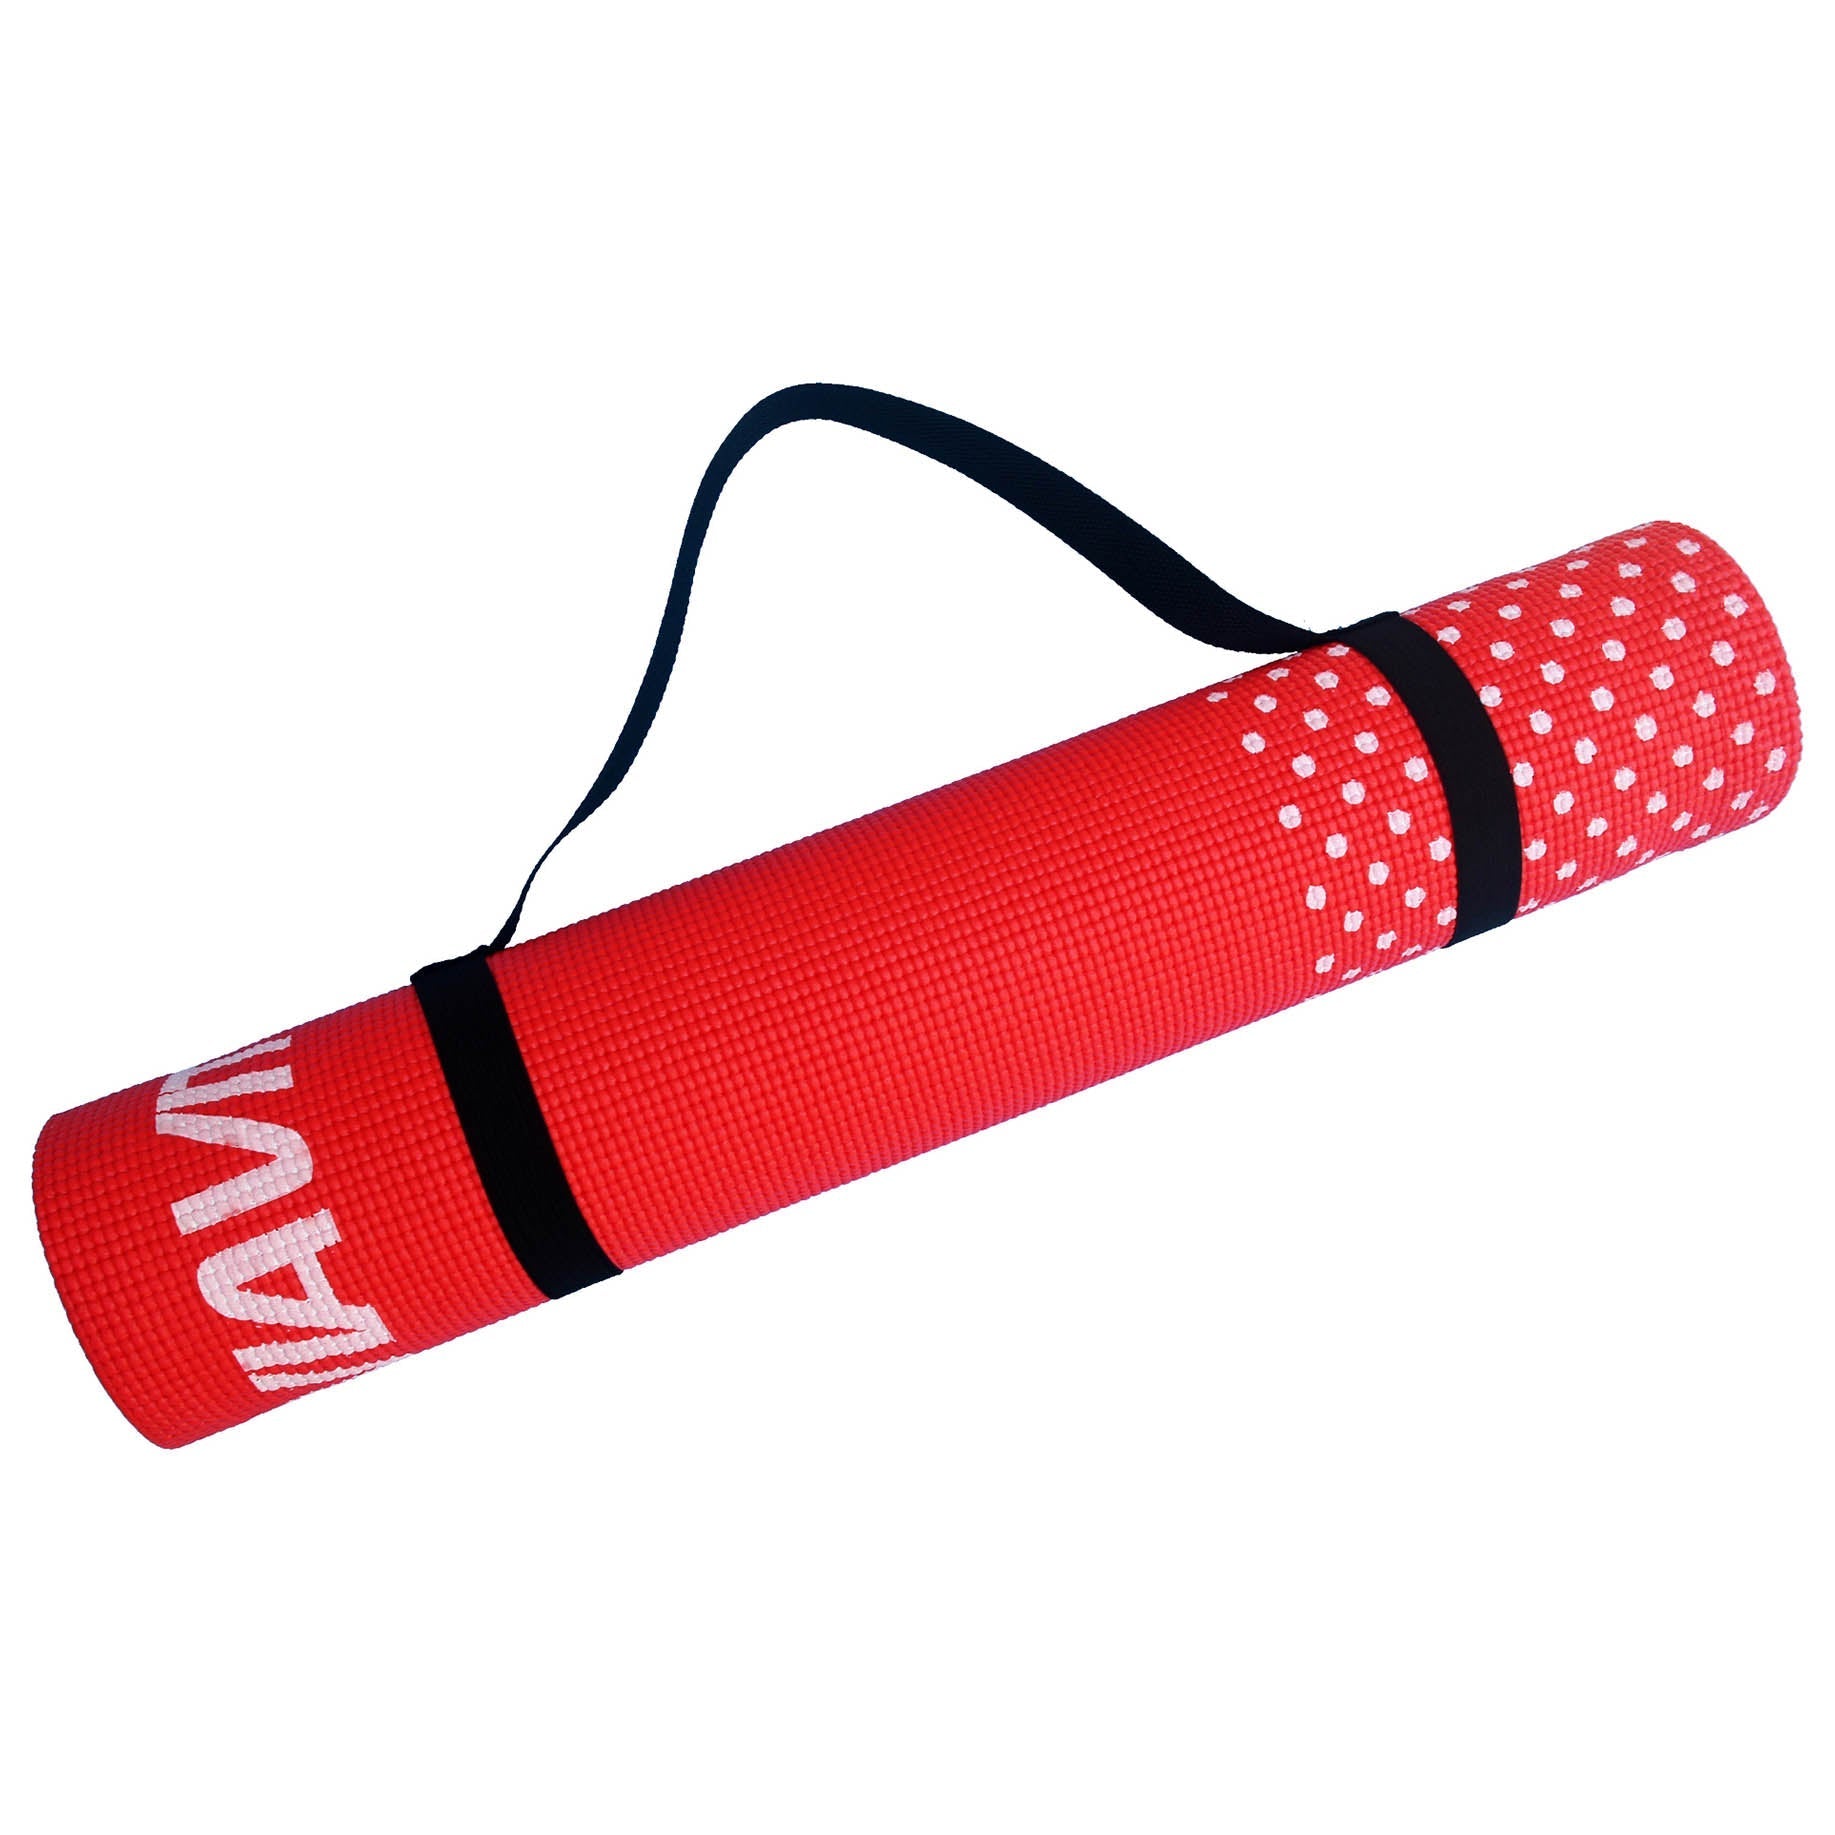 Yoga Mat Strap 160mm/120mm, Easy Carry Yoga Mat, Free Your Hands